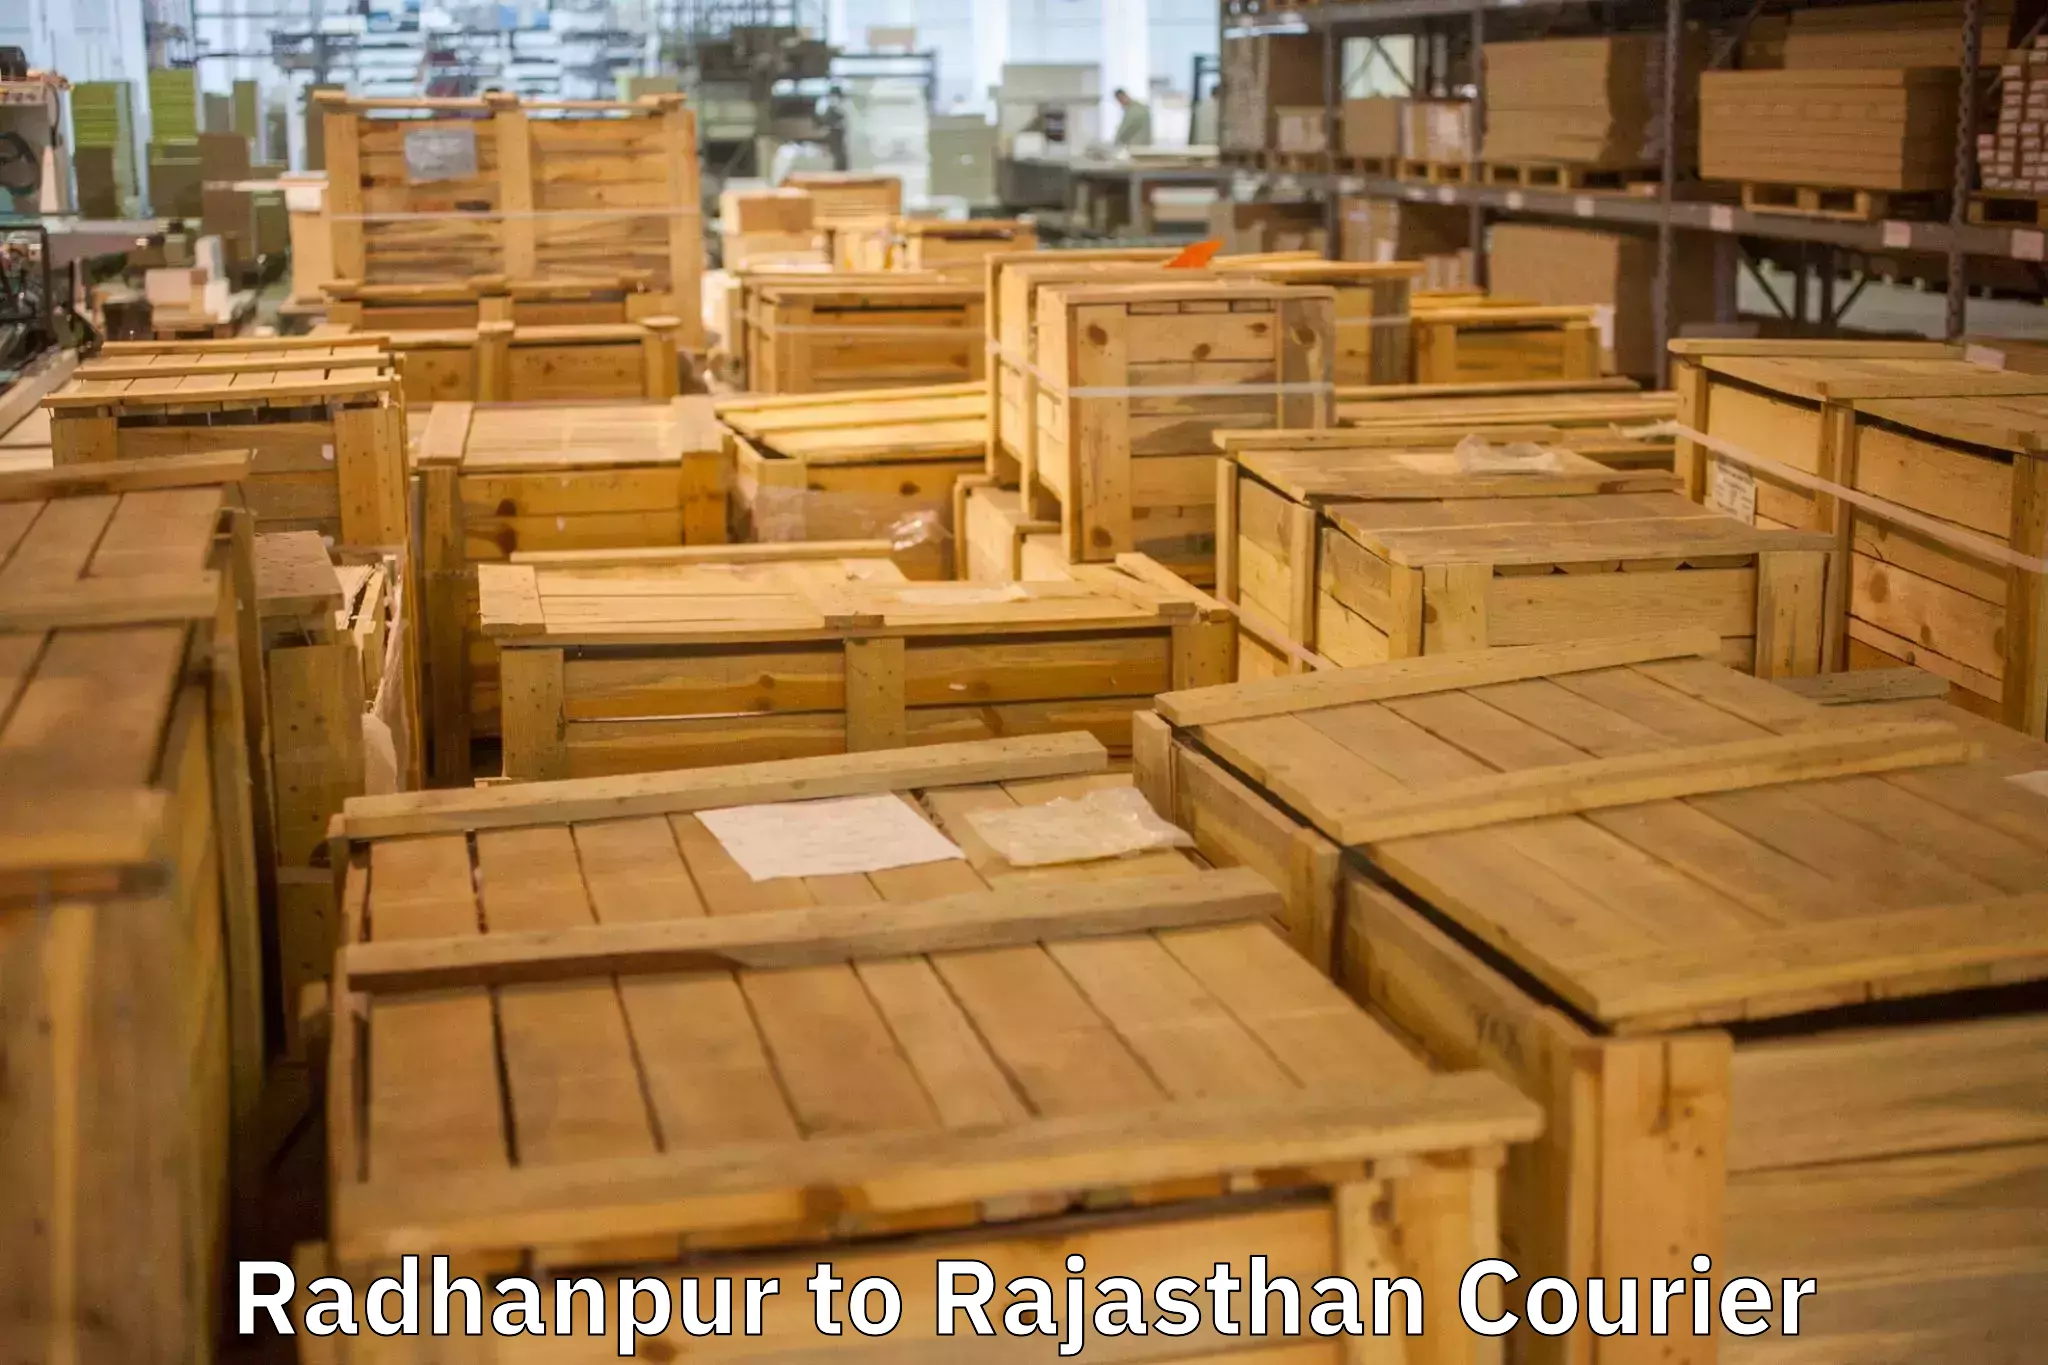 Trusted relocation experts Radhanpur to Rajasthan